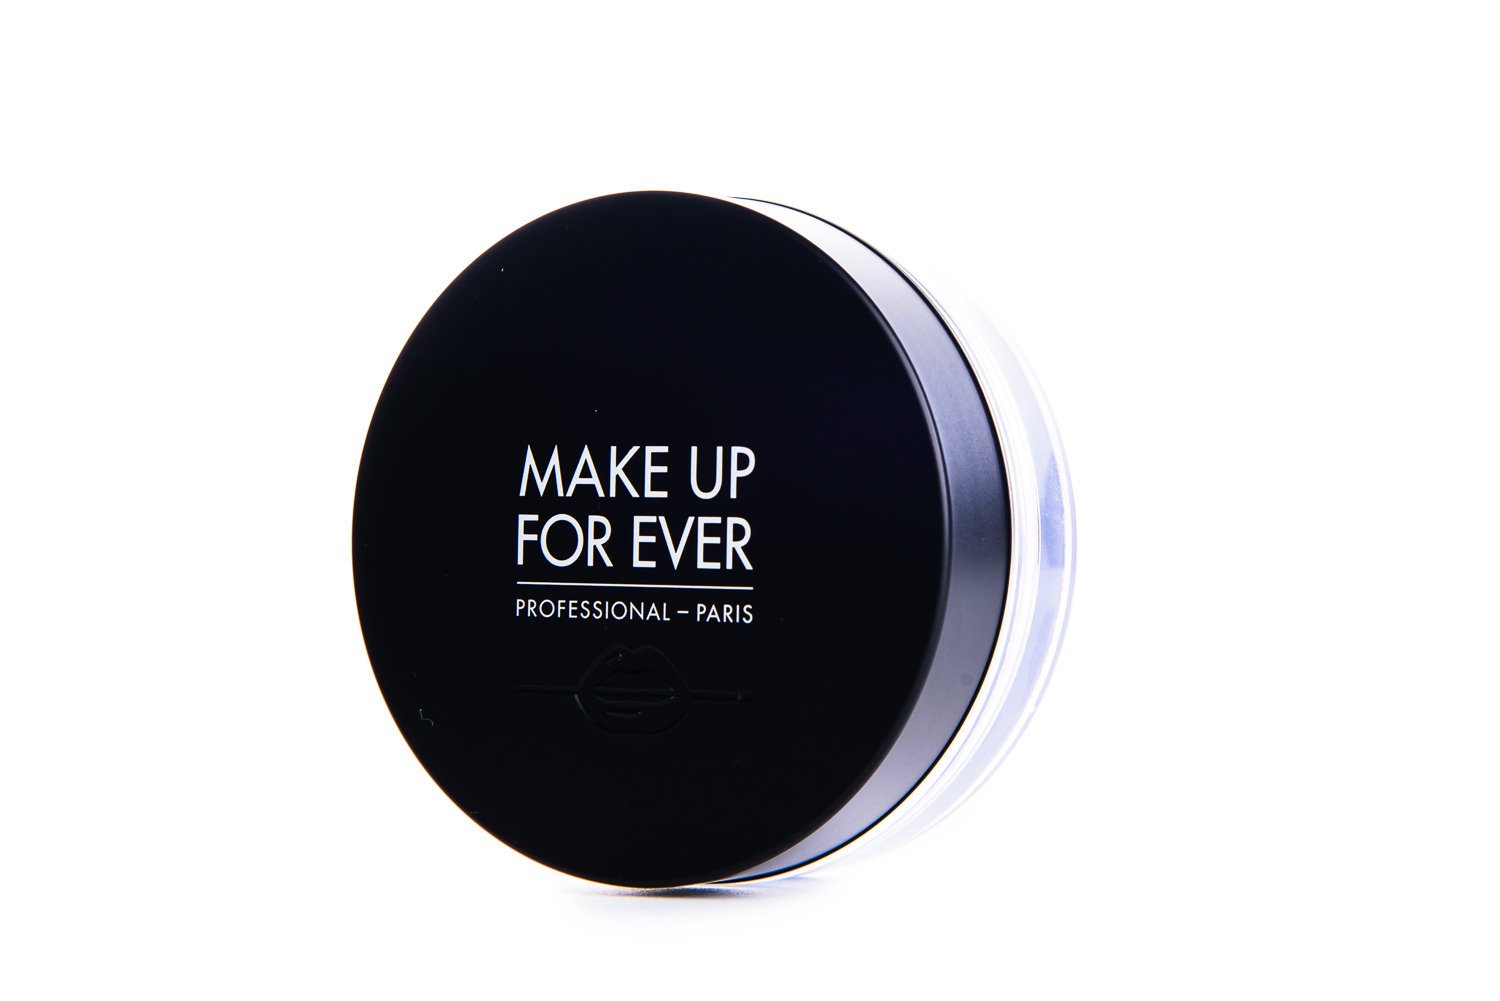  Make Up For Ever HD High Definition Microfinish Powder - Full size 0.30 oz./8.5g